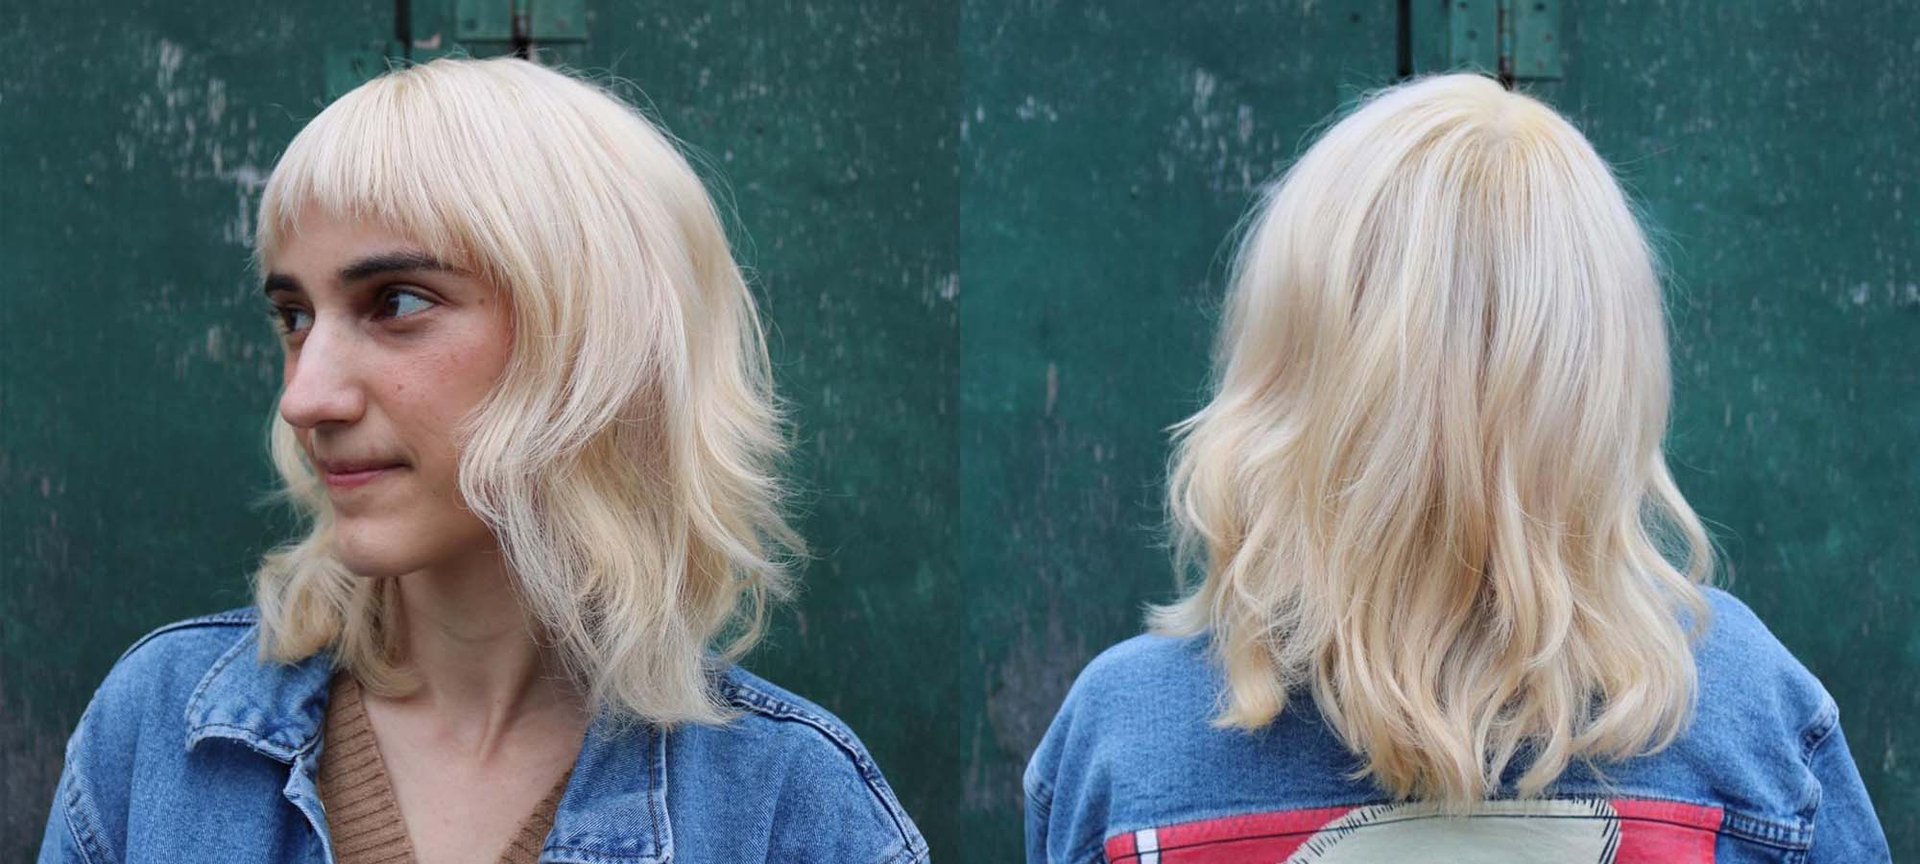 Baby Blonde Hair Is One Of The Prettiest Hair Color Trends CMS 02 Bmag